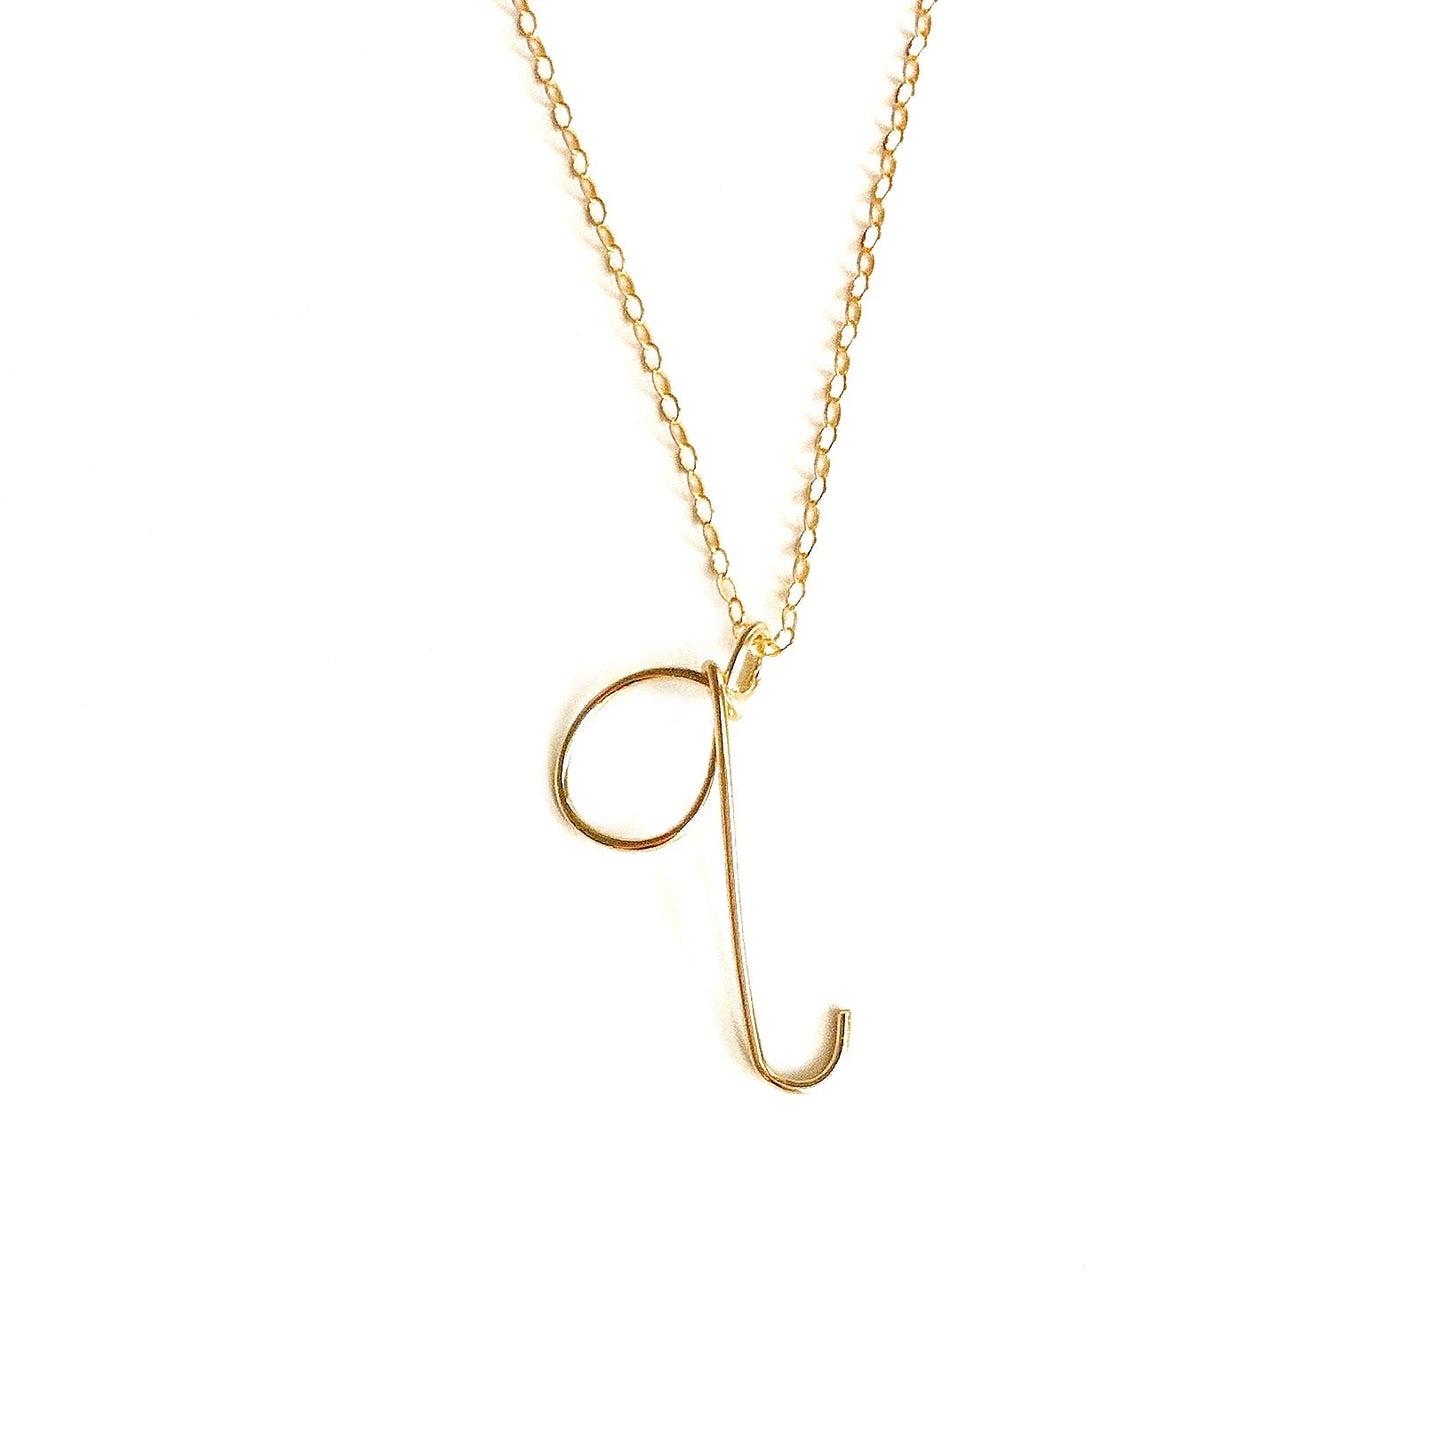 Handmade Initial Necklace Robyn Canady q 14K Gold Filled 